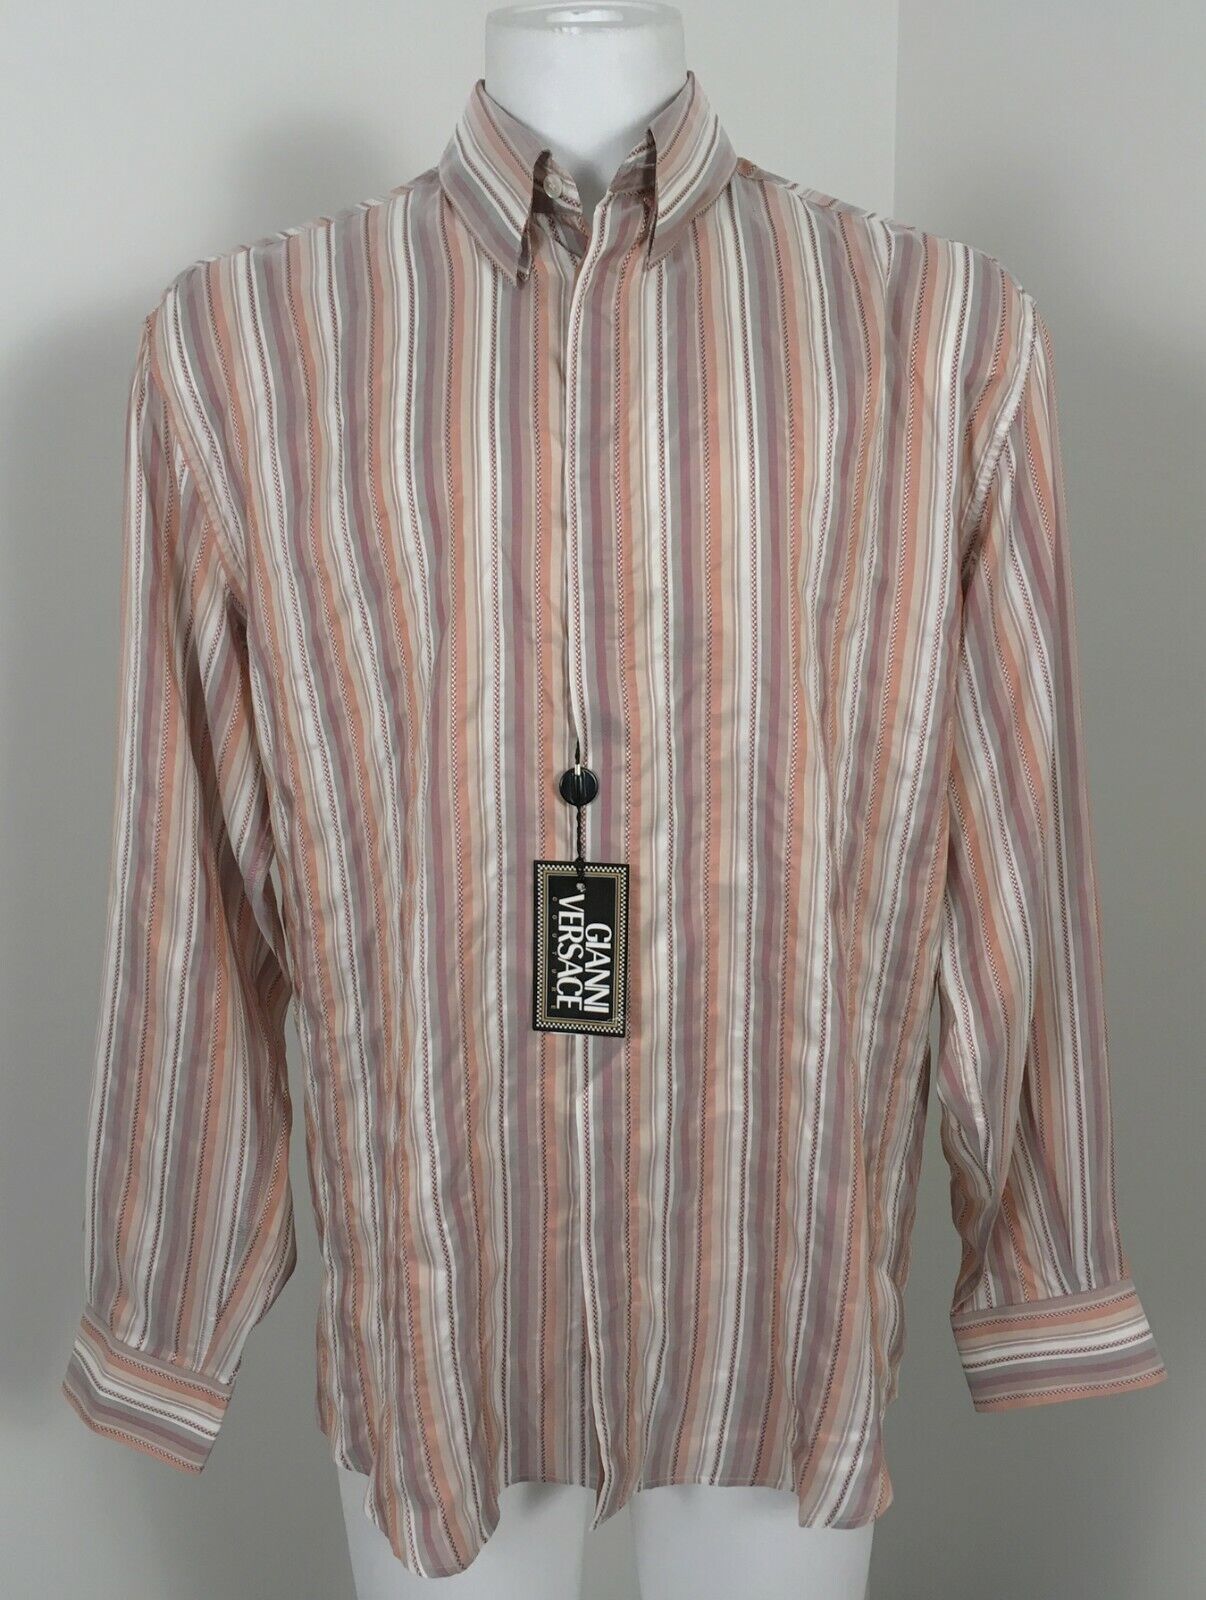 NEW VINTAGE 90's Gianni Versace Couture Silk Shirt! e 54 (XL) Colorful  Stripes